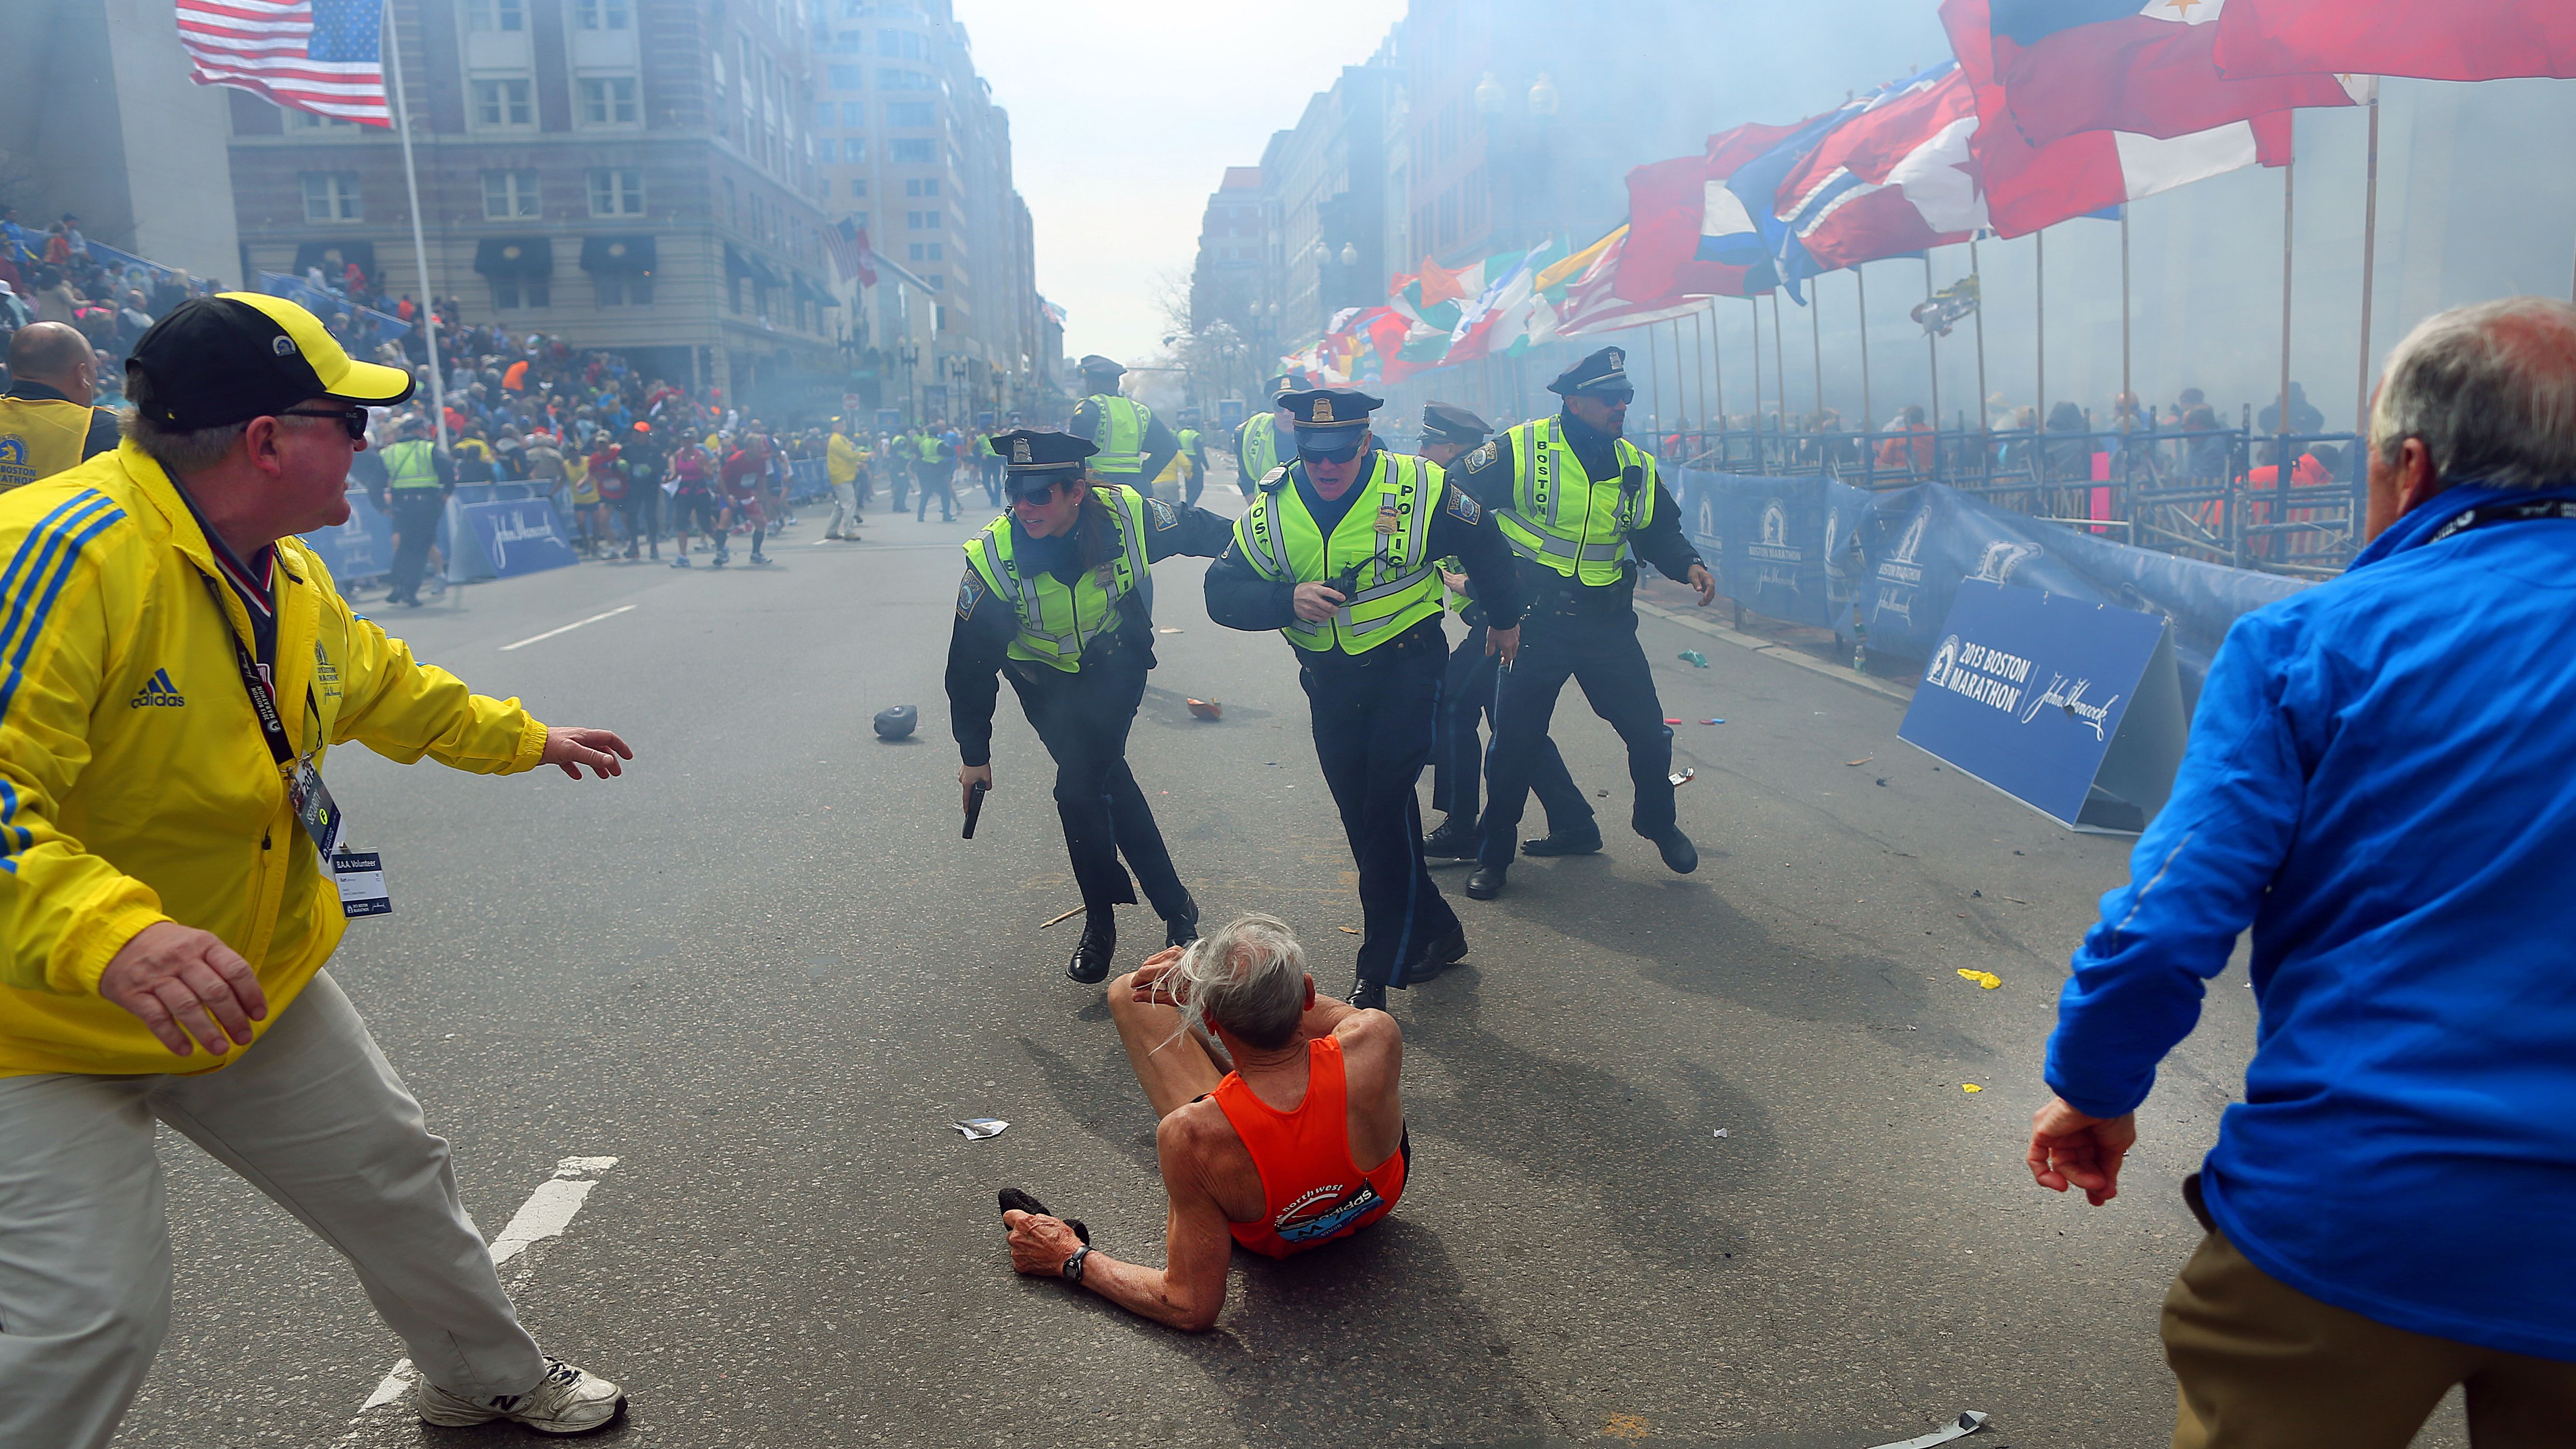 Police officers stand over marathon runner Bill Iffrig as a second explosion sounds near the finish line of the Boston Marathon in April 2013. Three people were killed and at least 264 were injured in <a href="https://www.cnn.com/2013/06/03/us/boston-marathon-terror-attack-fast-facts/index.html" target="_blank">the terror attack.</a>